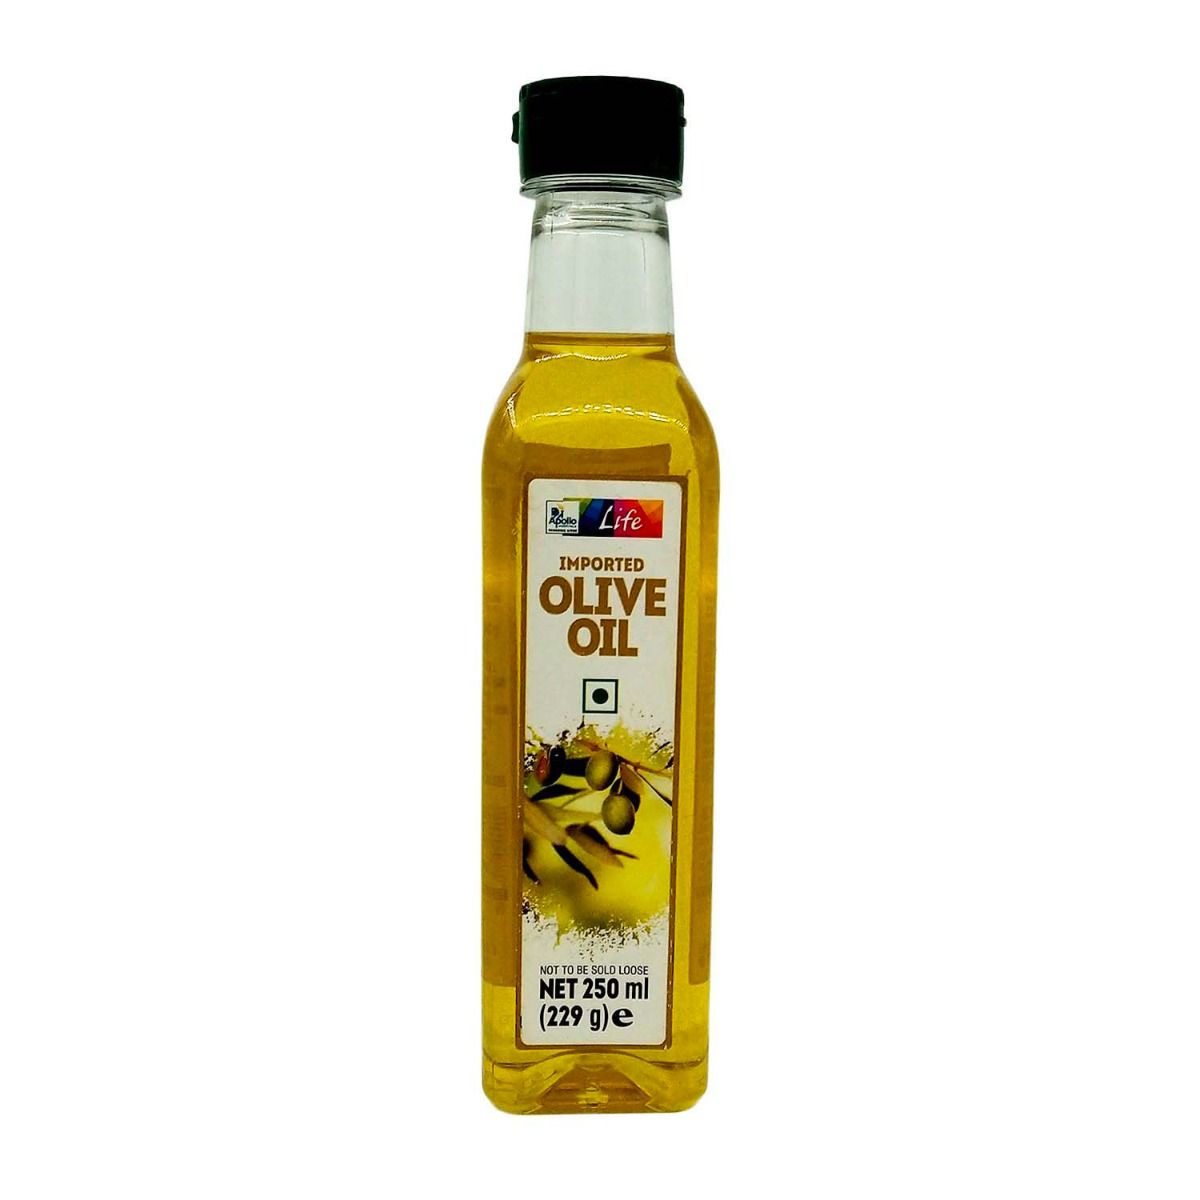 Apollo Life Olive Oil, 250 ml, Pack of 1 